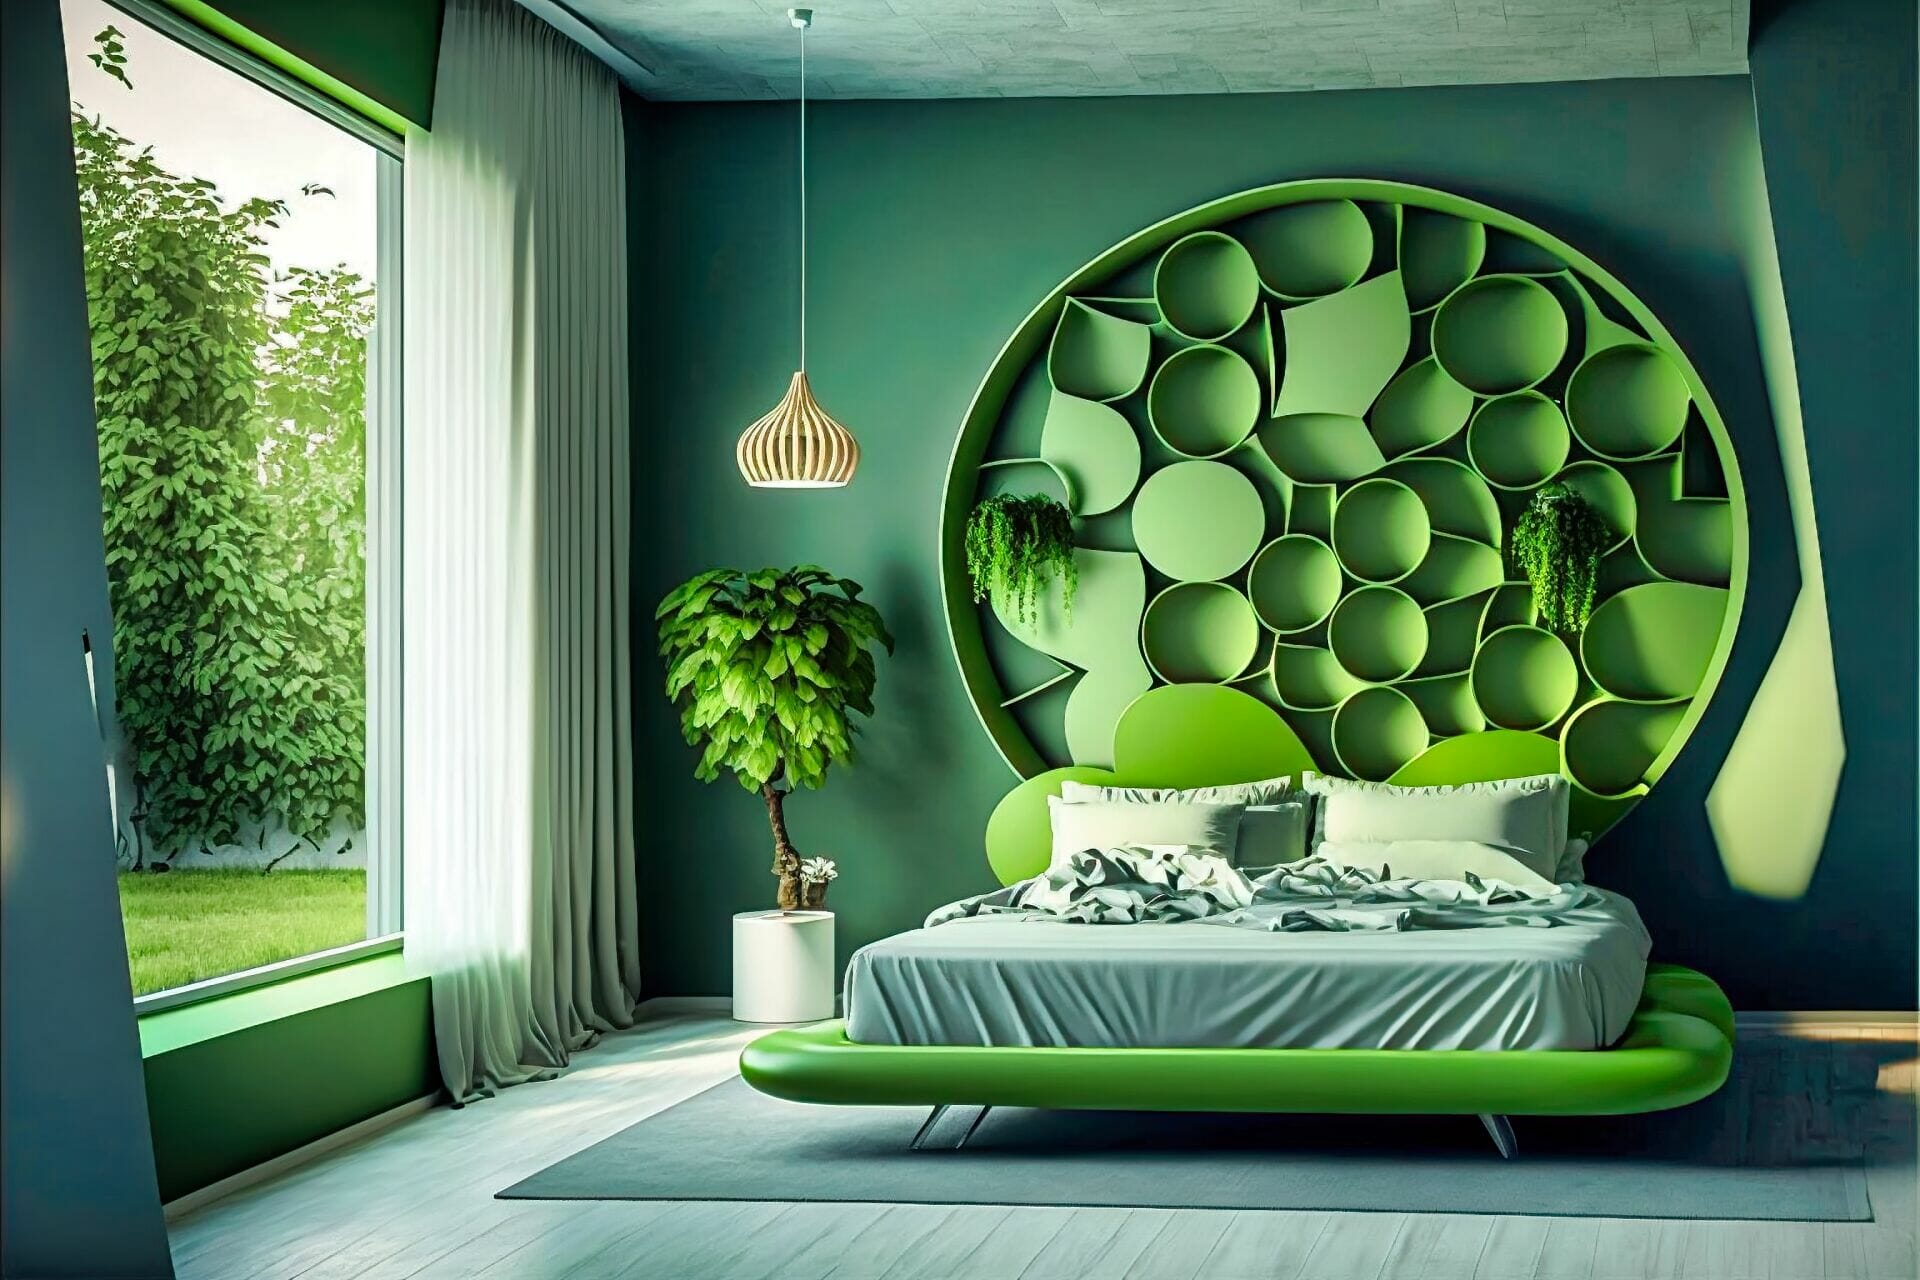 Futuristic Style Bedroom With A Relaxing Atmosphere: This Bedroom Is Perfect For Relaxation, With Its Soothing Green Walls, Plush Furniture, And Natural Wood Accents. The Bed Is Surrounded By Lush Plants And Greenery, While The Floor Is Made Up Of Soft Wood Tiles.